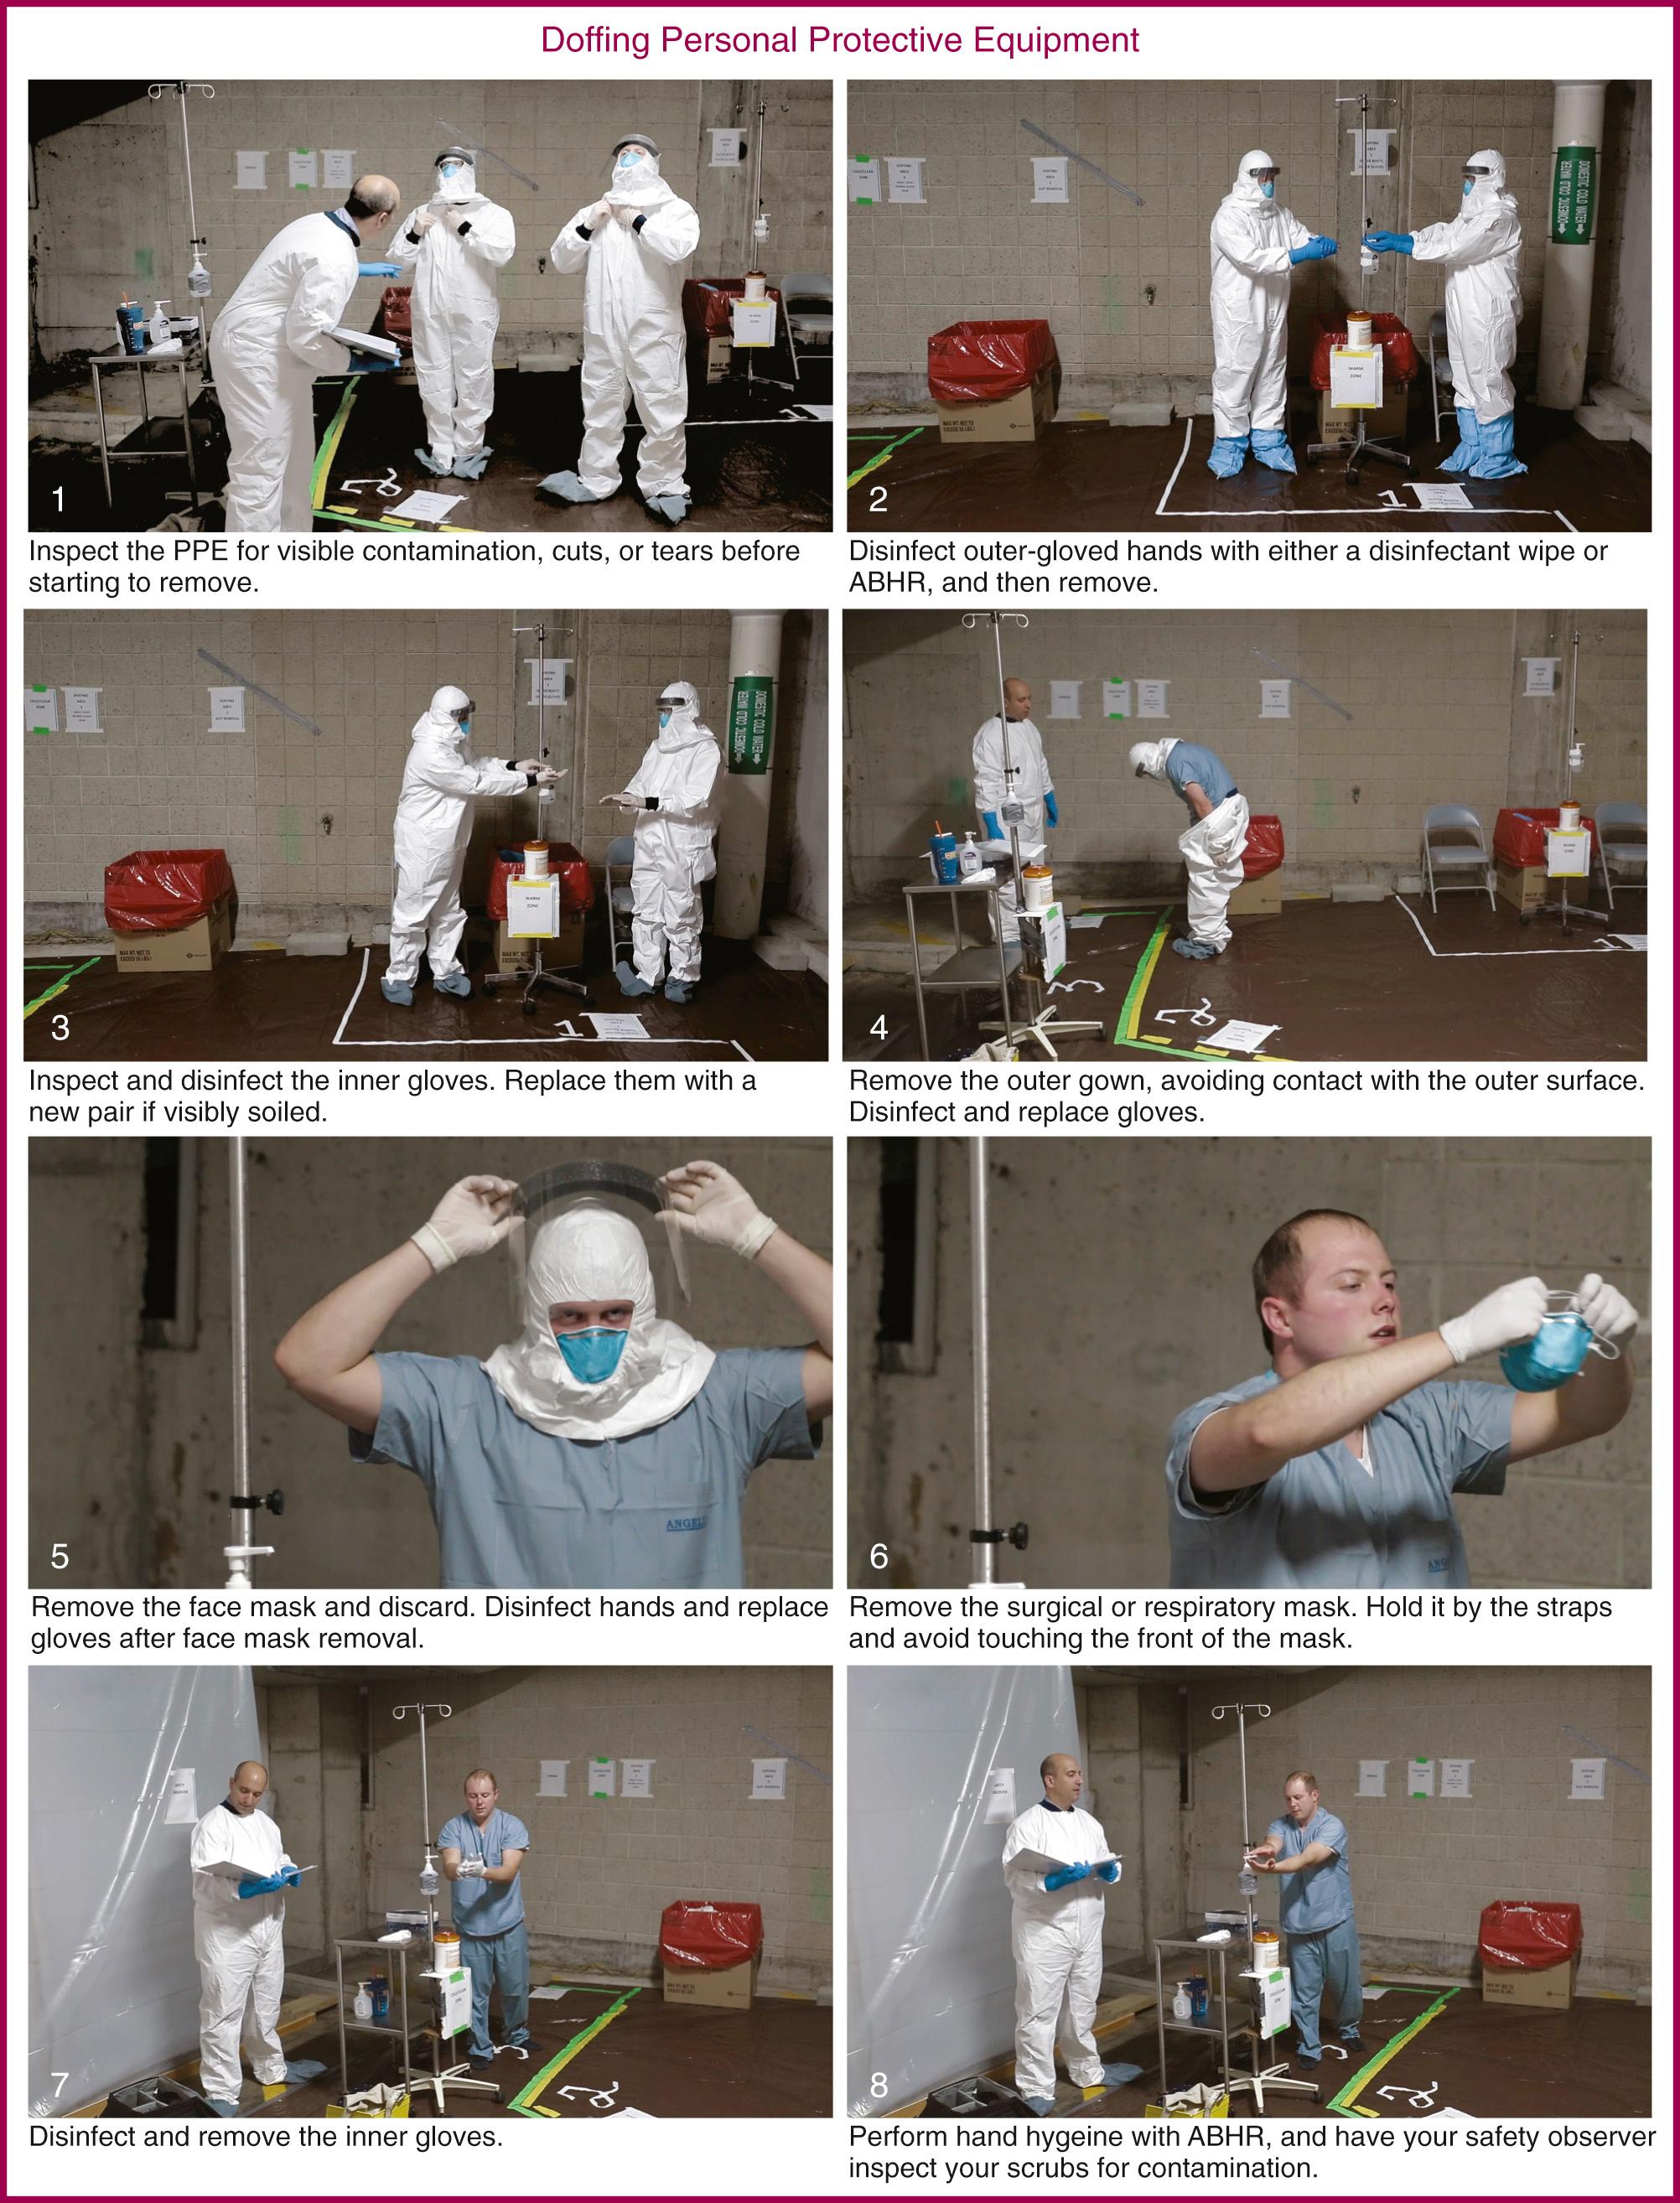 Figure 68.8, Doffing personal protective equipment.